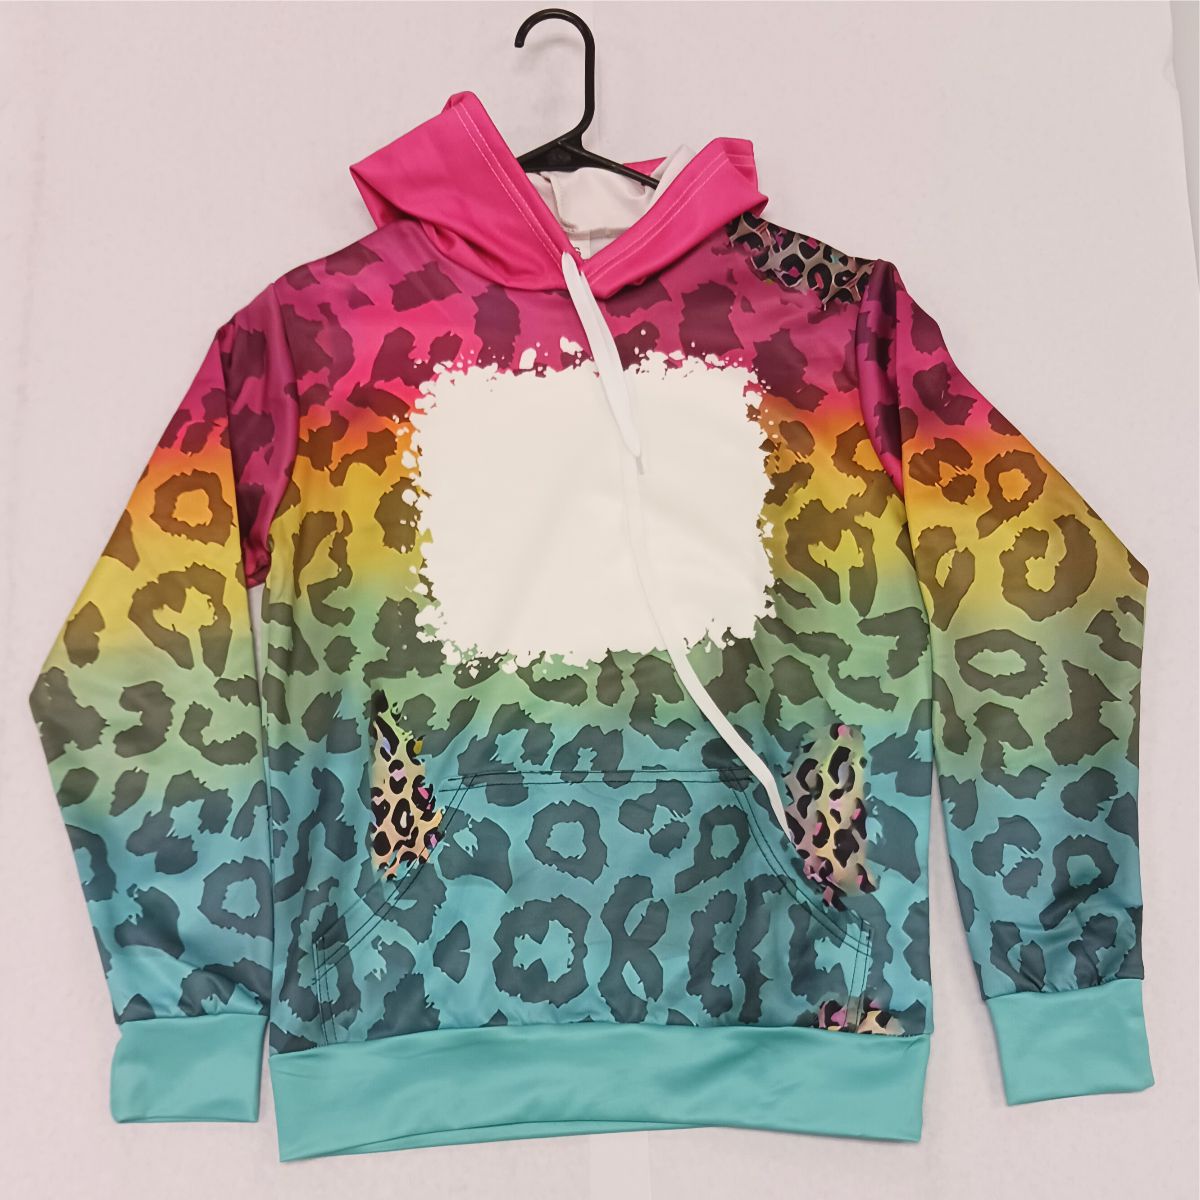 Discount Hoodie Adult Size 4 (Multiple Color Choices) CLEARANCE